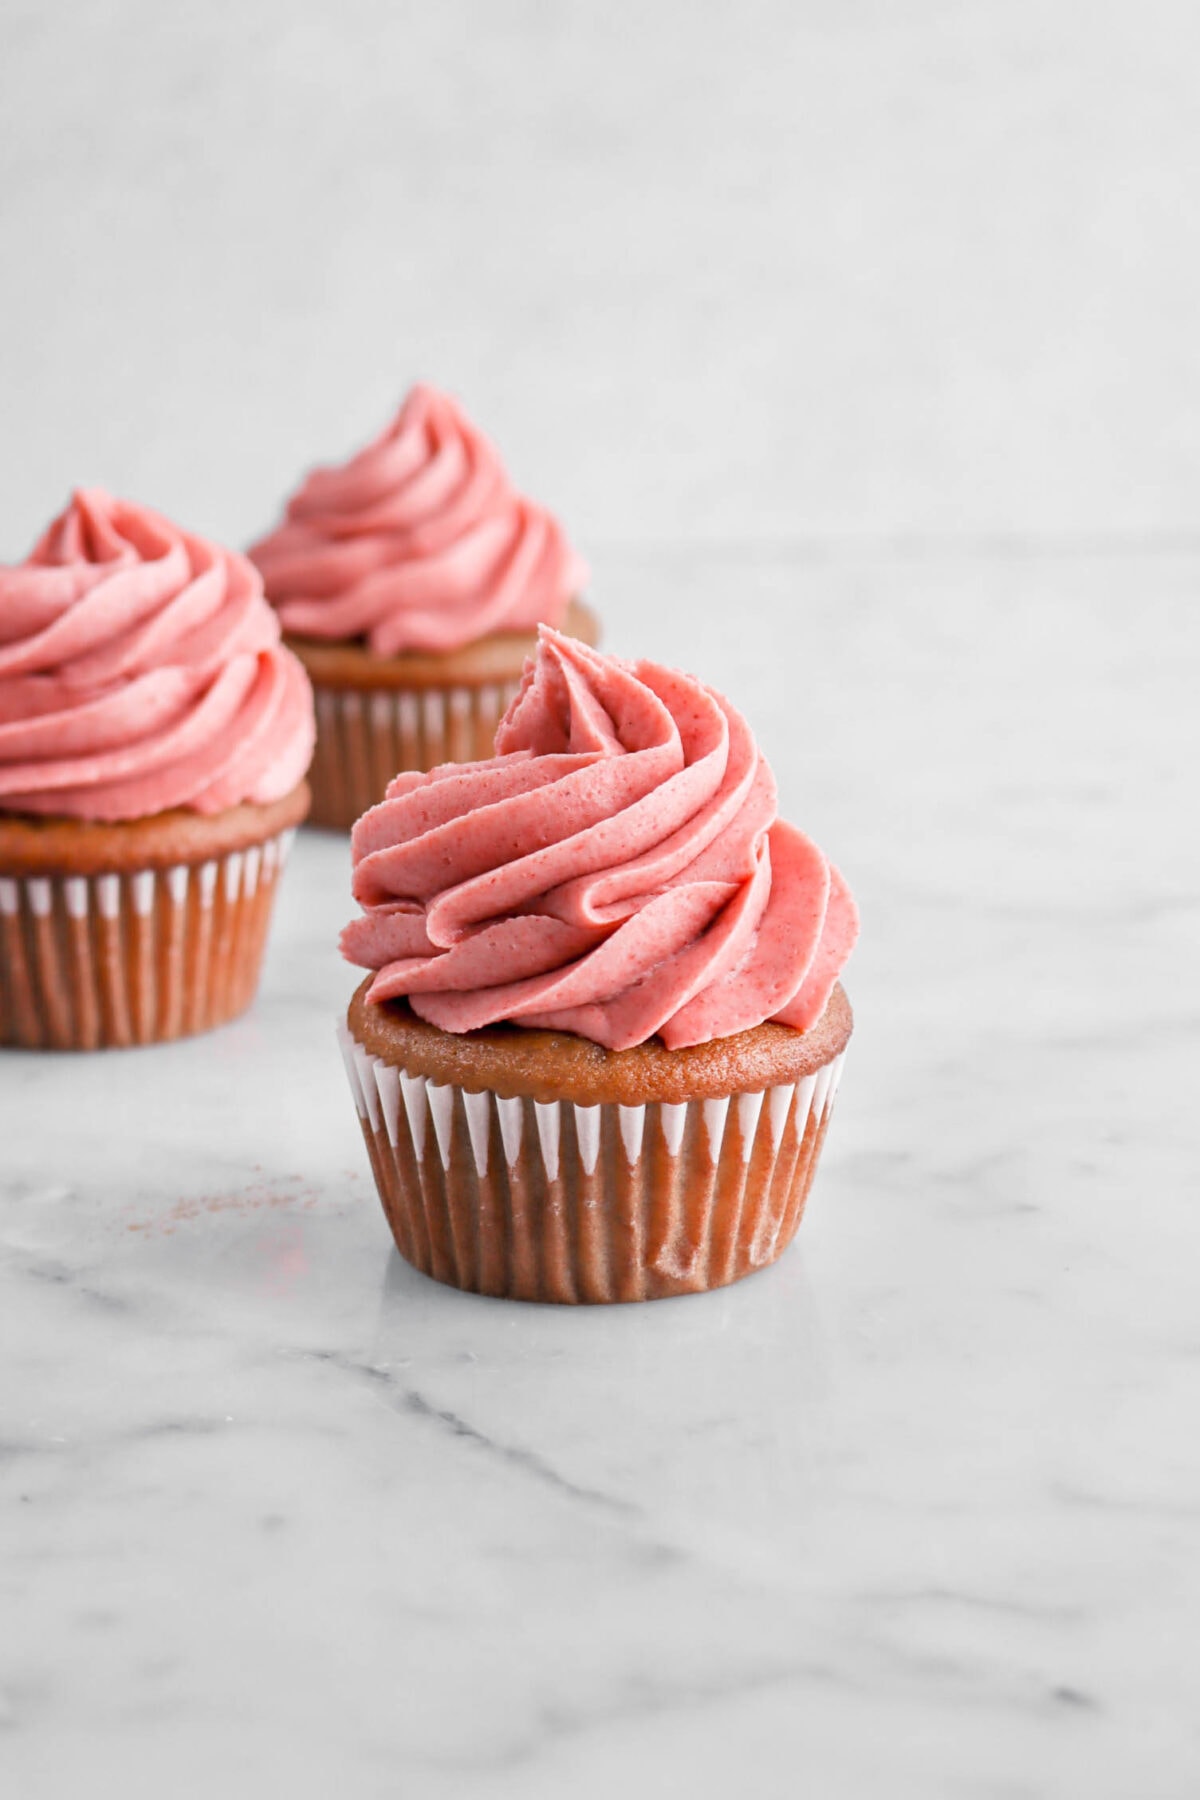 three strawberry cupcakes with piped strawberry frosting on top on marble surface.